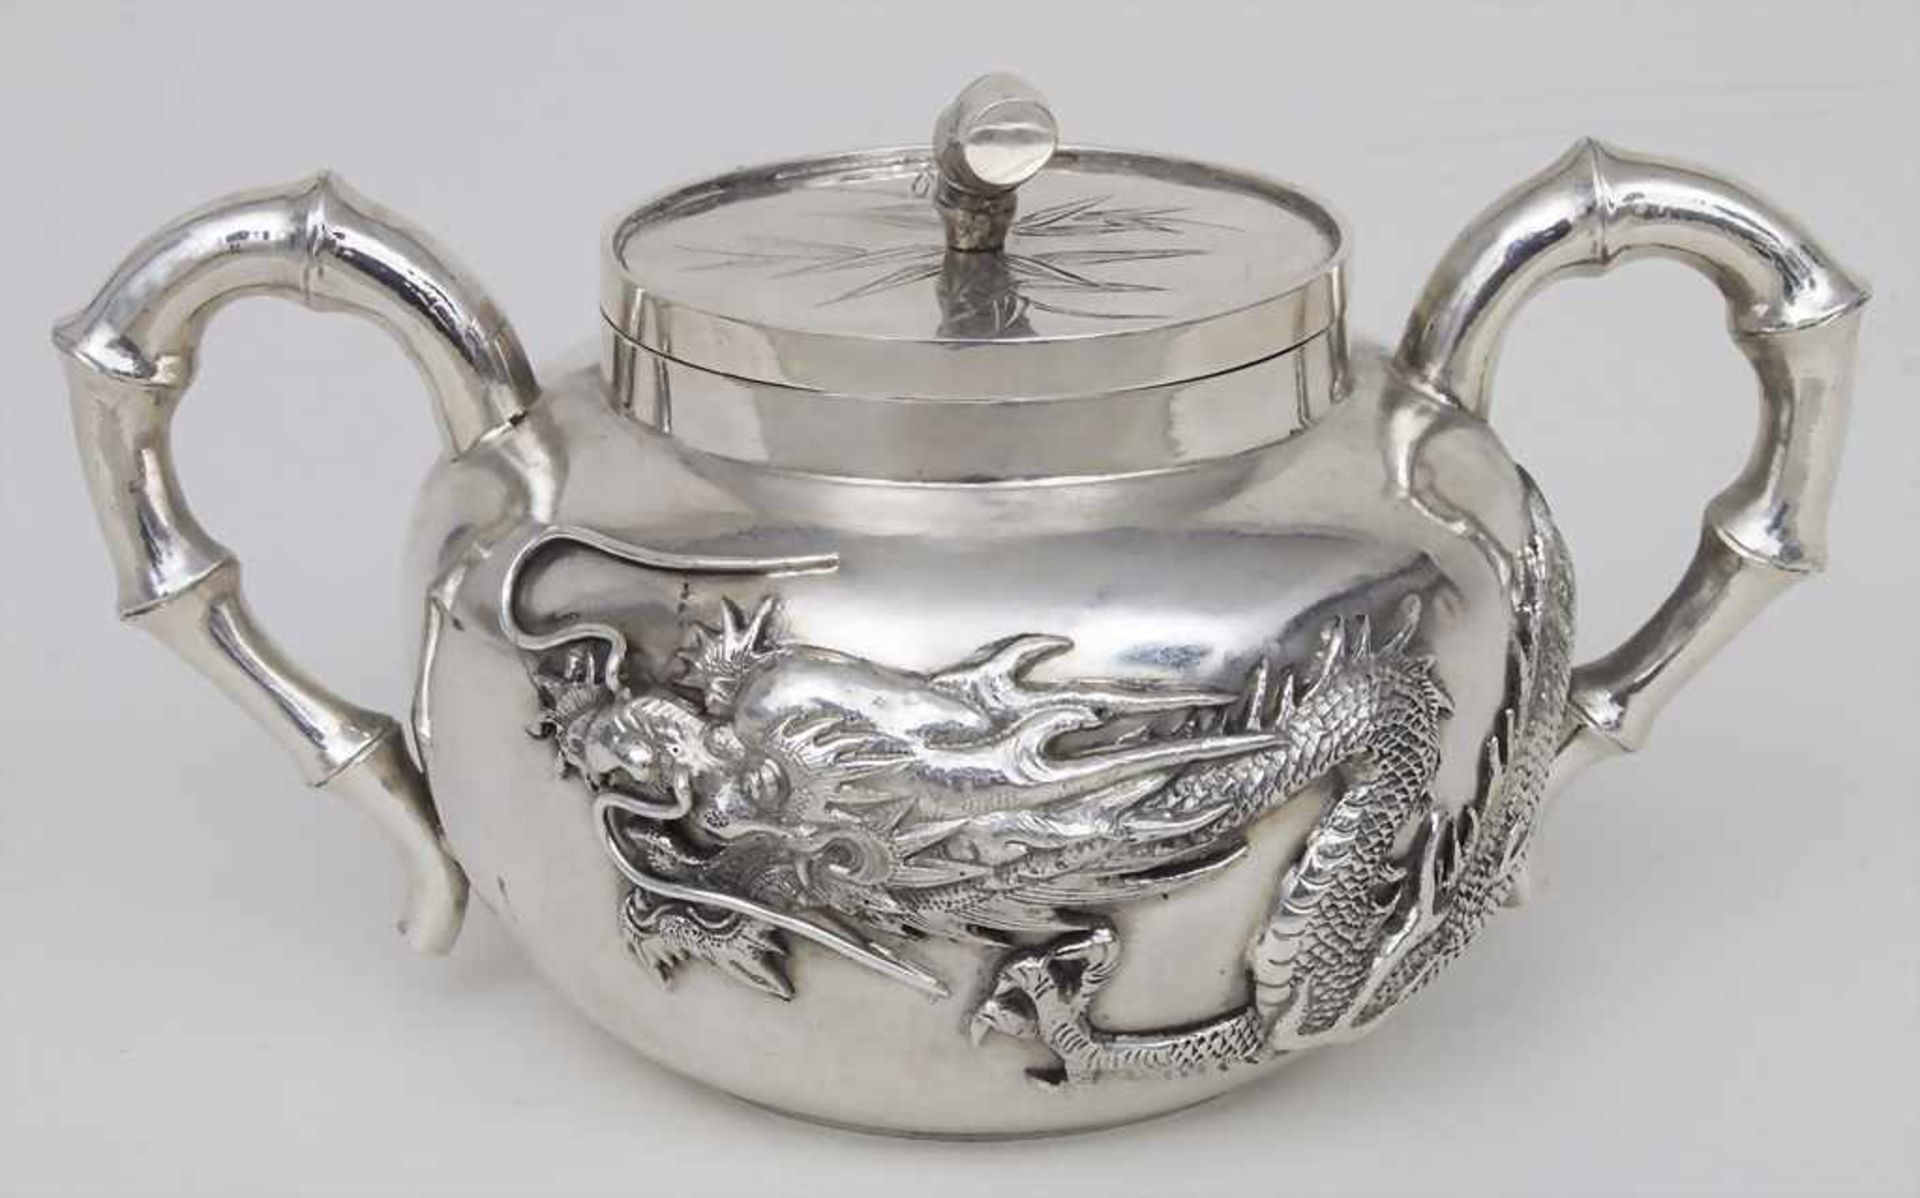 Zuckerdose mit Drachen / A Chinese export silver sugar bowl with a dragon, Wing Nam & Co. (1875-